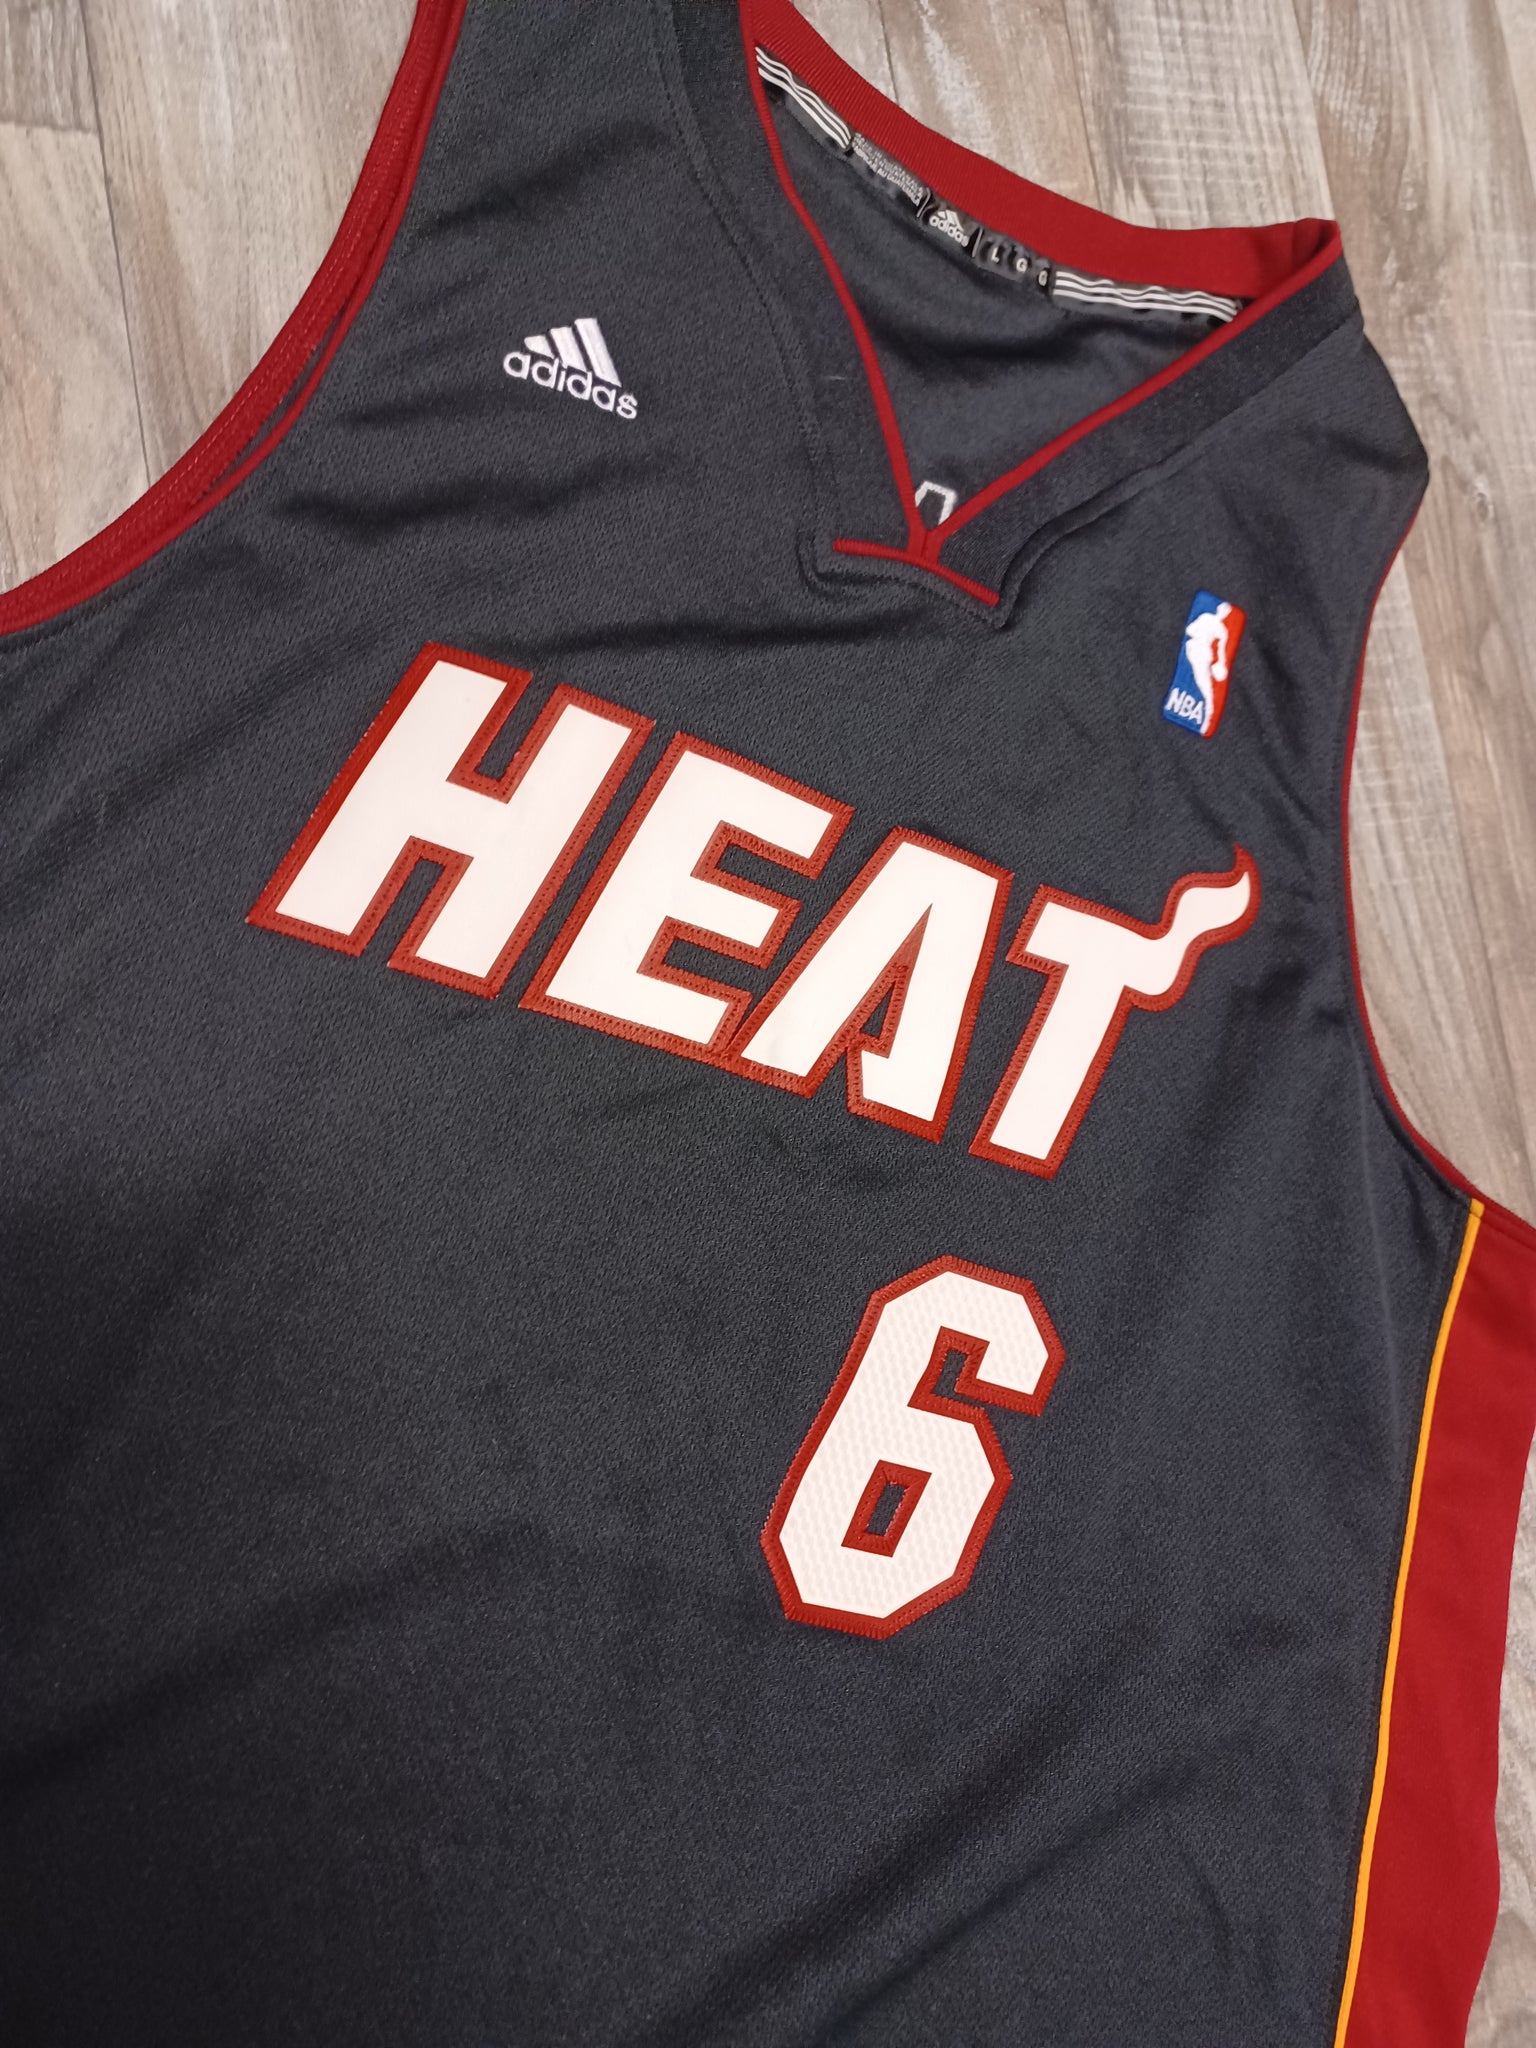 Shop Lebron James Miami Heat Jersey with great discounts and